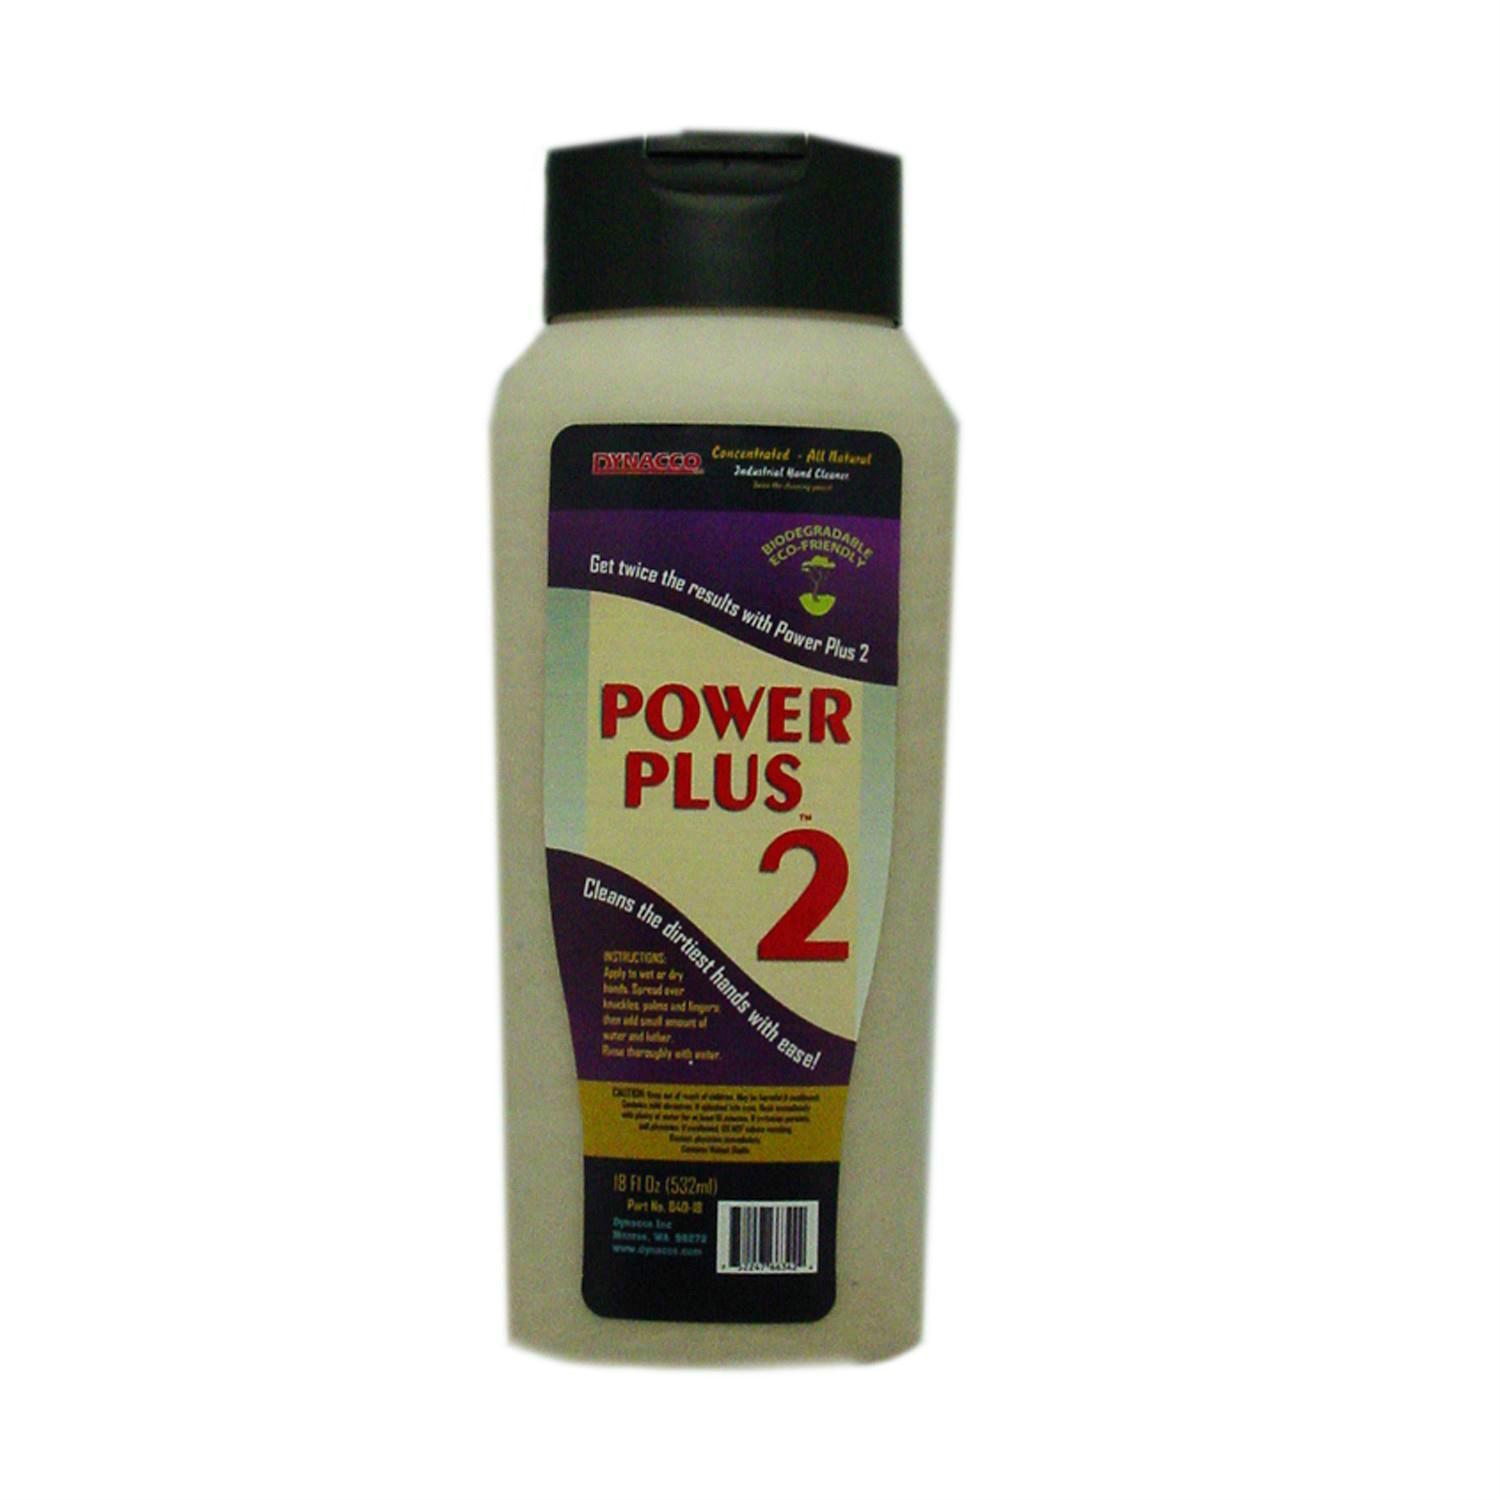 Power Plus 2 Hand Cleaner